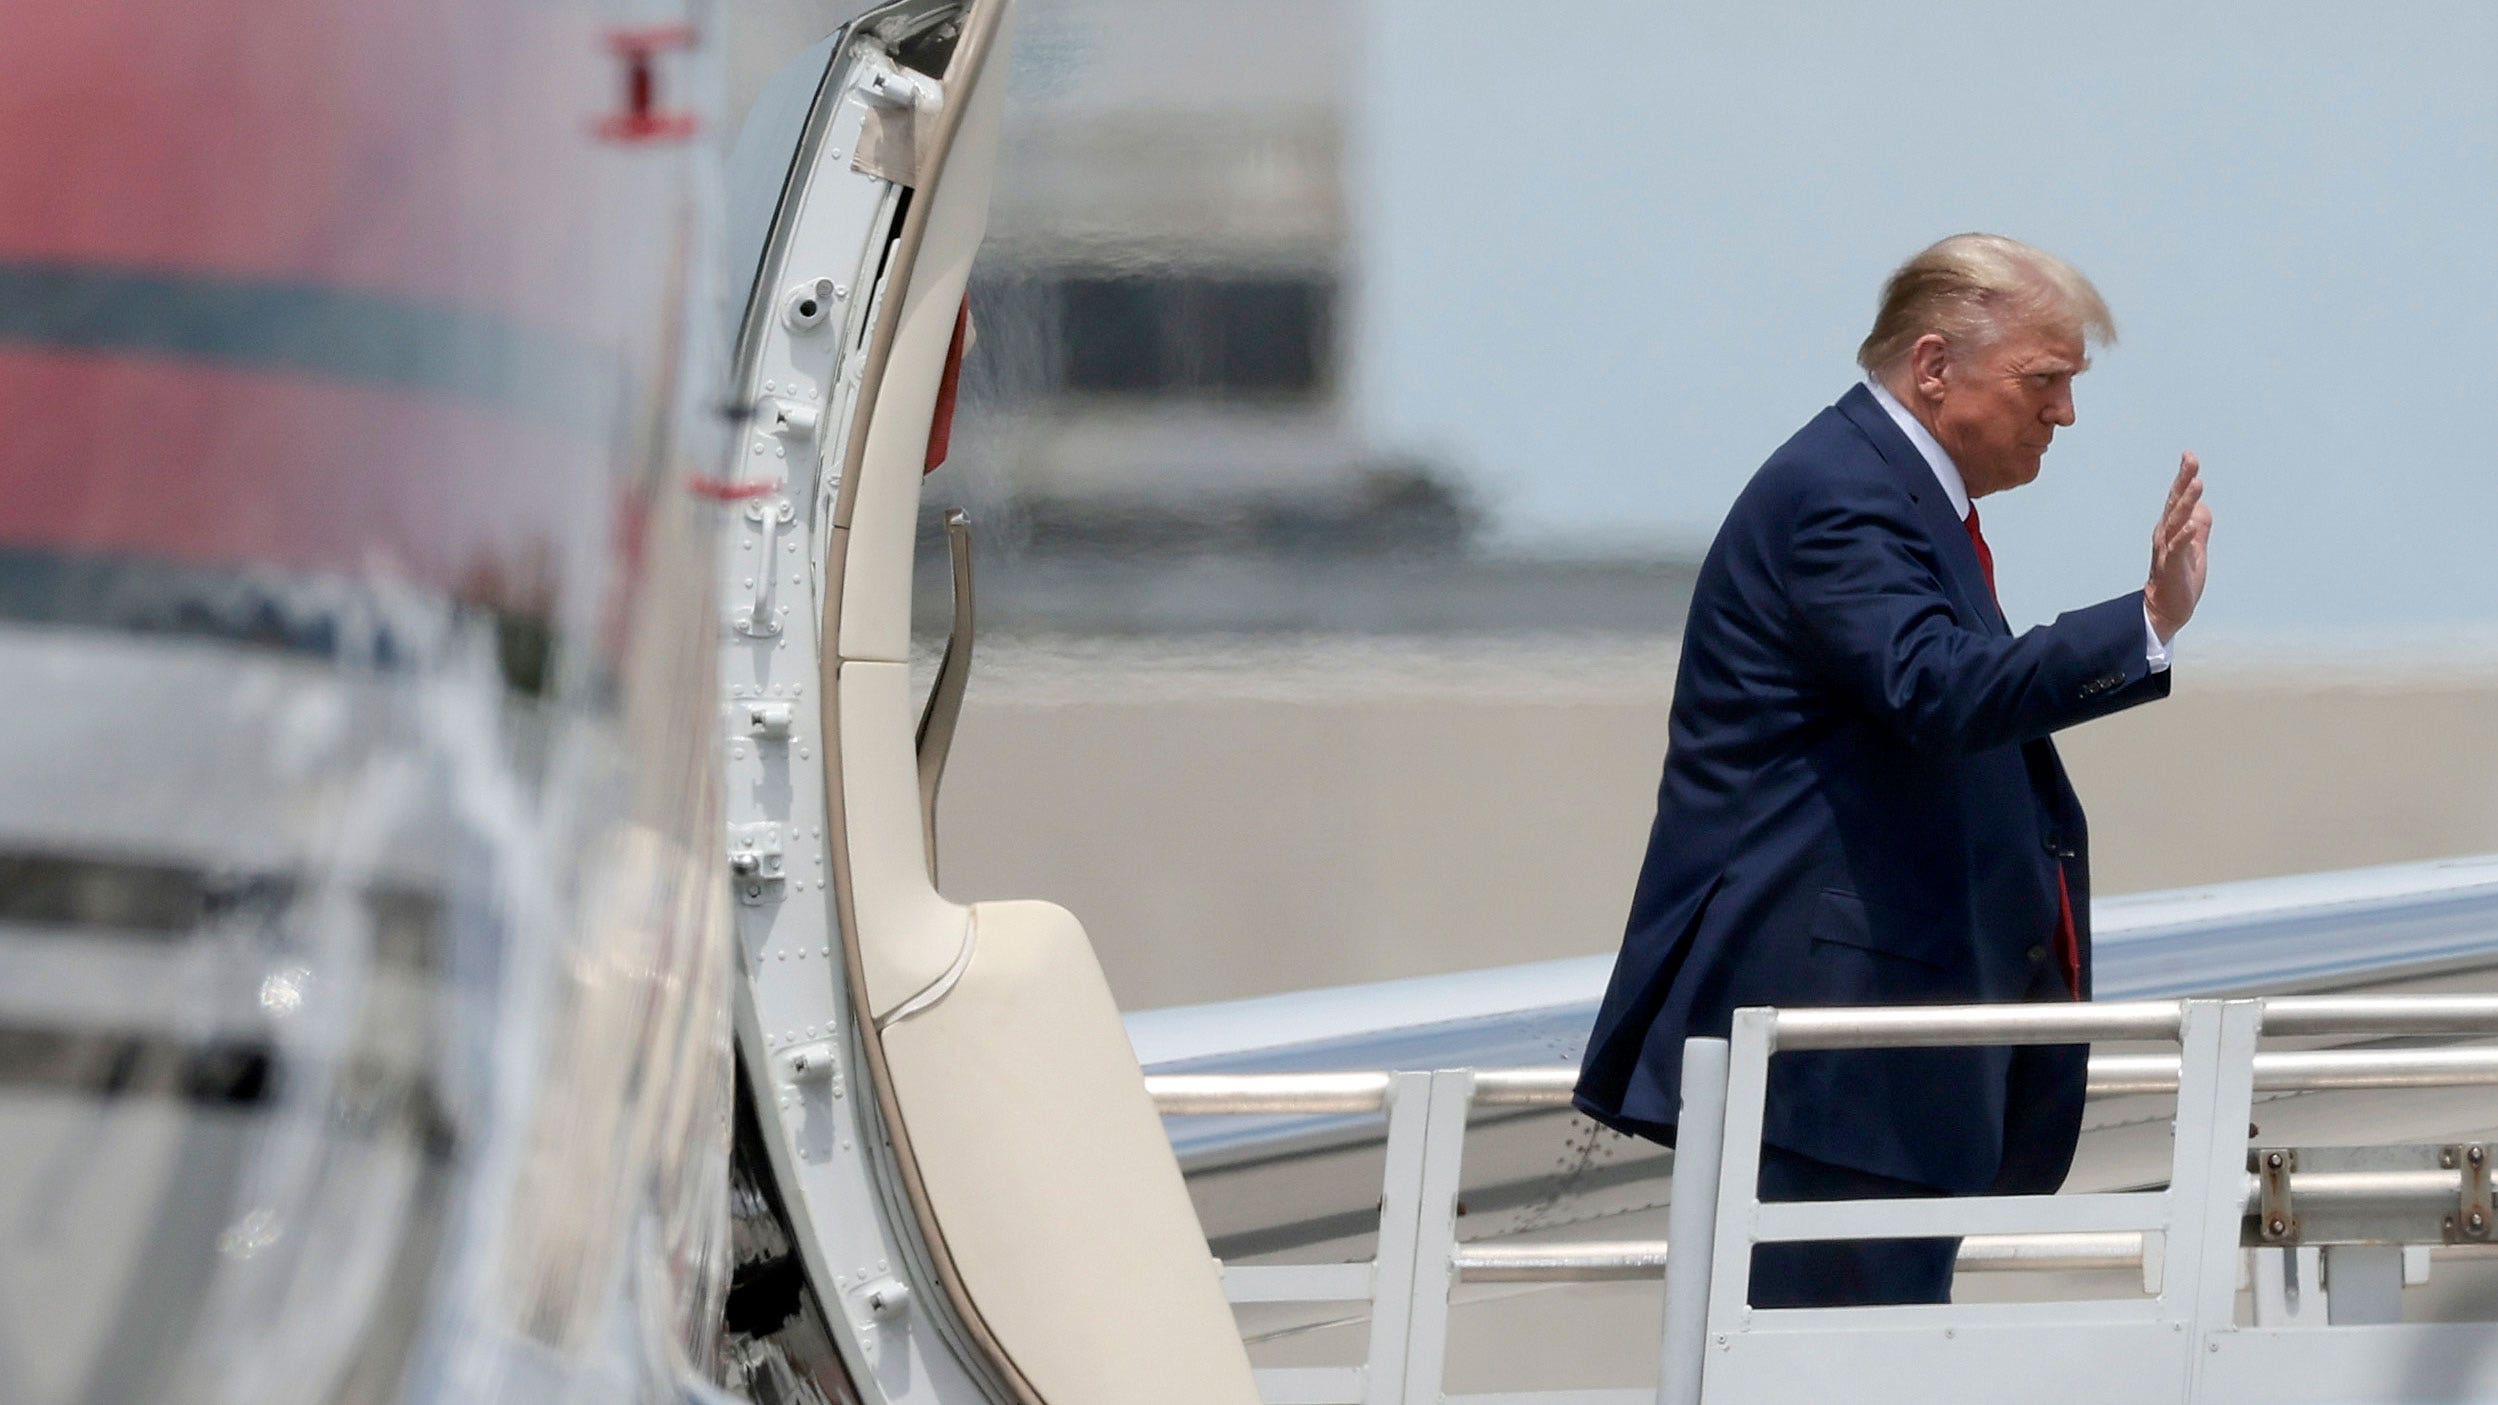 Trump arrives at Miami hotel ahead of arraignment on federal charges